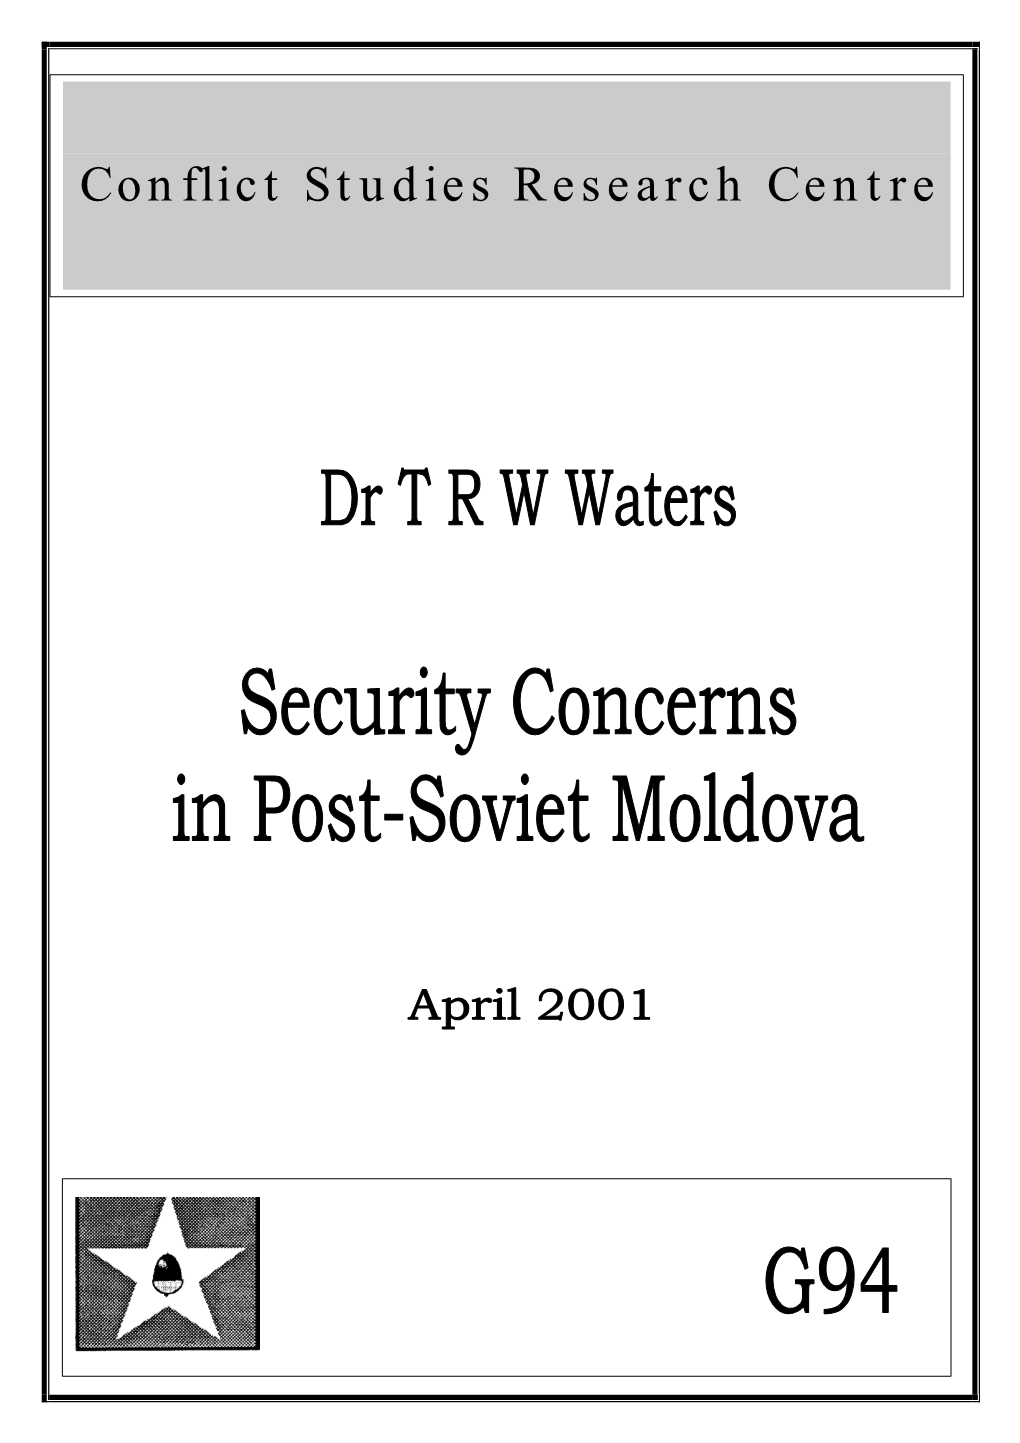 Security Concerns in Post-Soviet Moldova: Still No Light at the End of the Tunnel